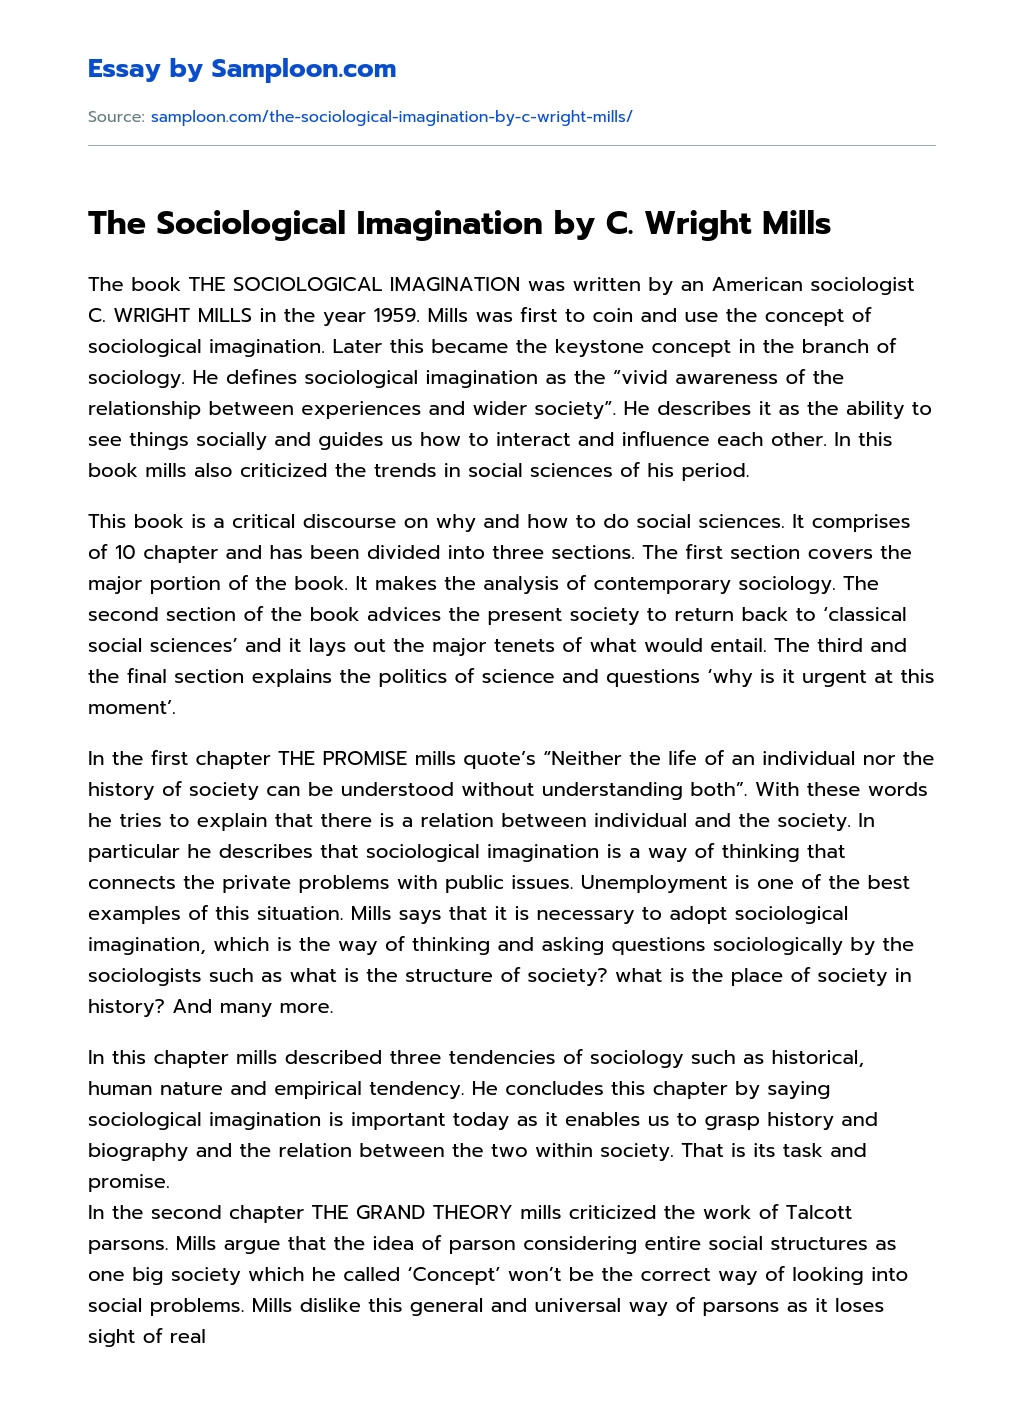 The Sociological Imagination by C. Wright Mills essay